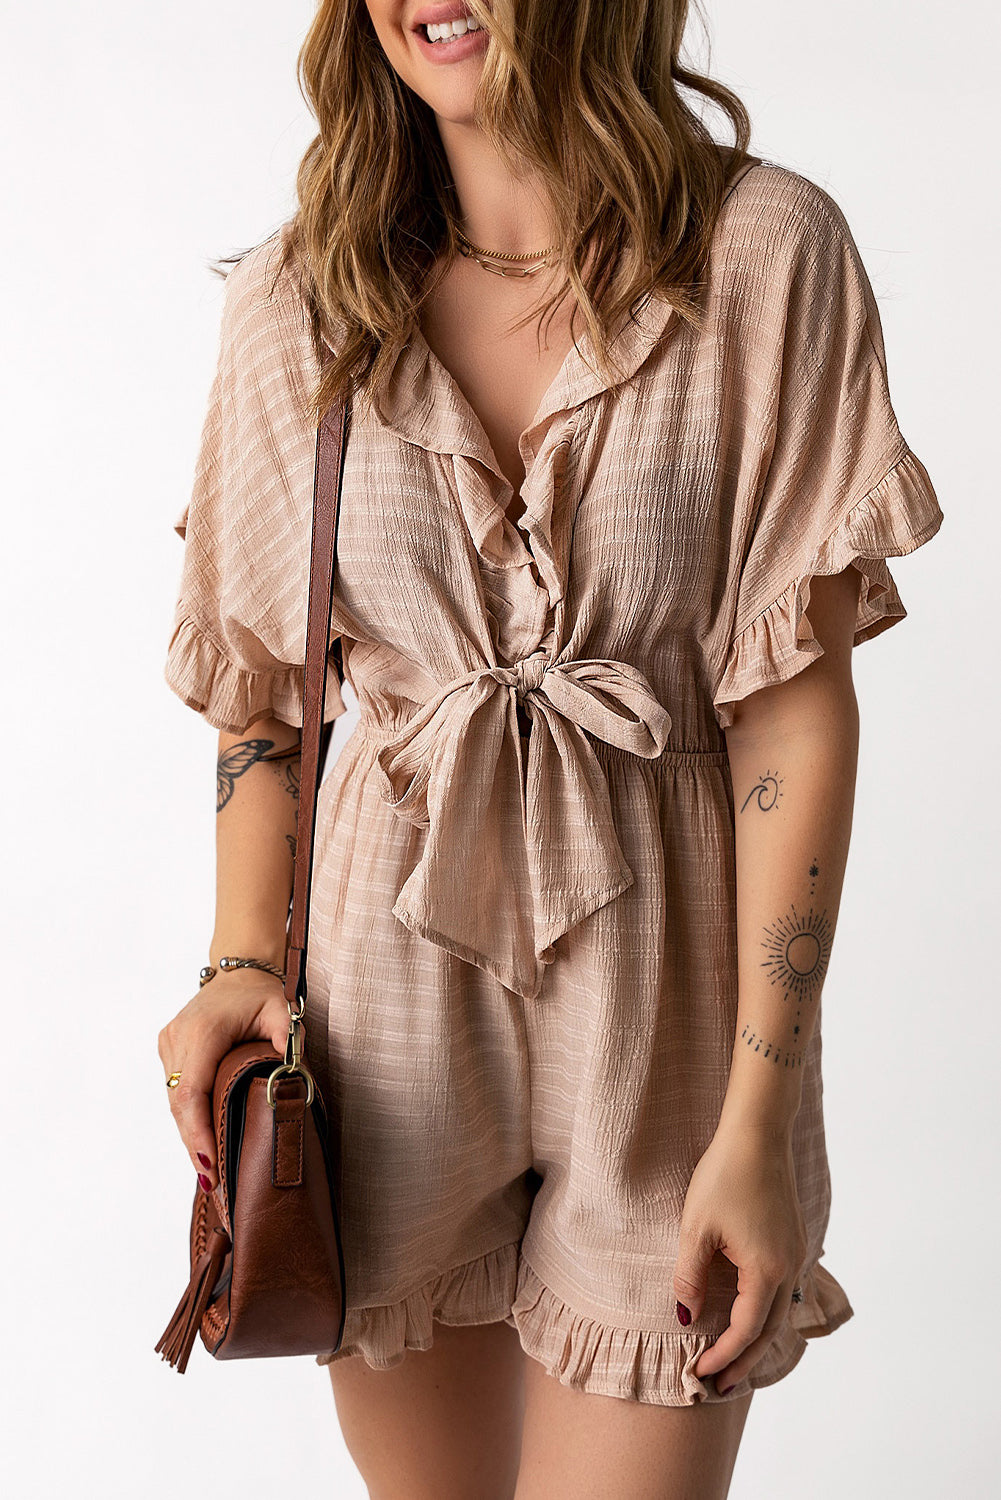 Striped Tie Detail Ruffled Romper with Pockets Playsuit  Sunset and Swim   